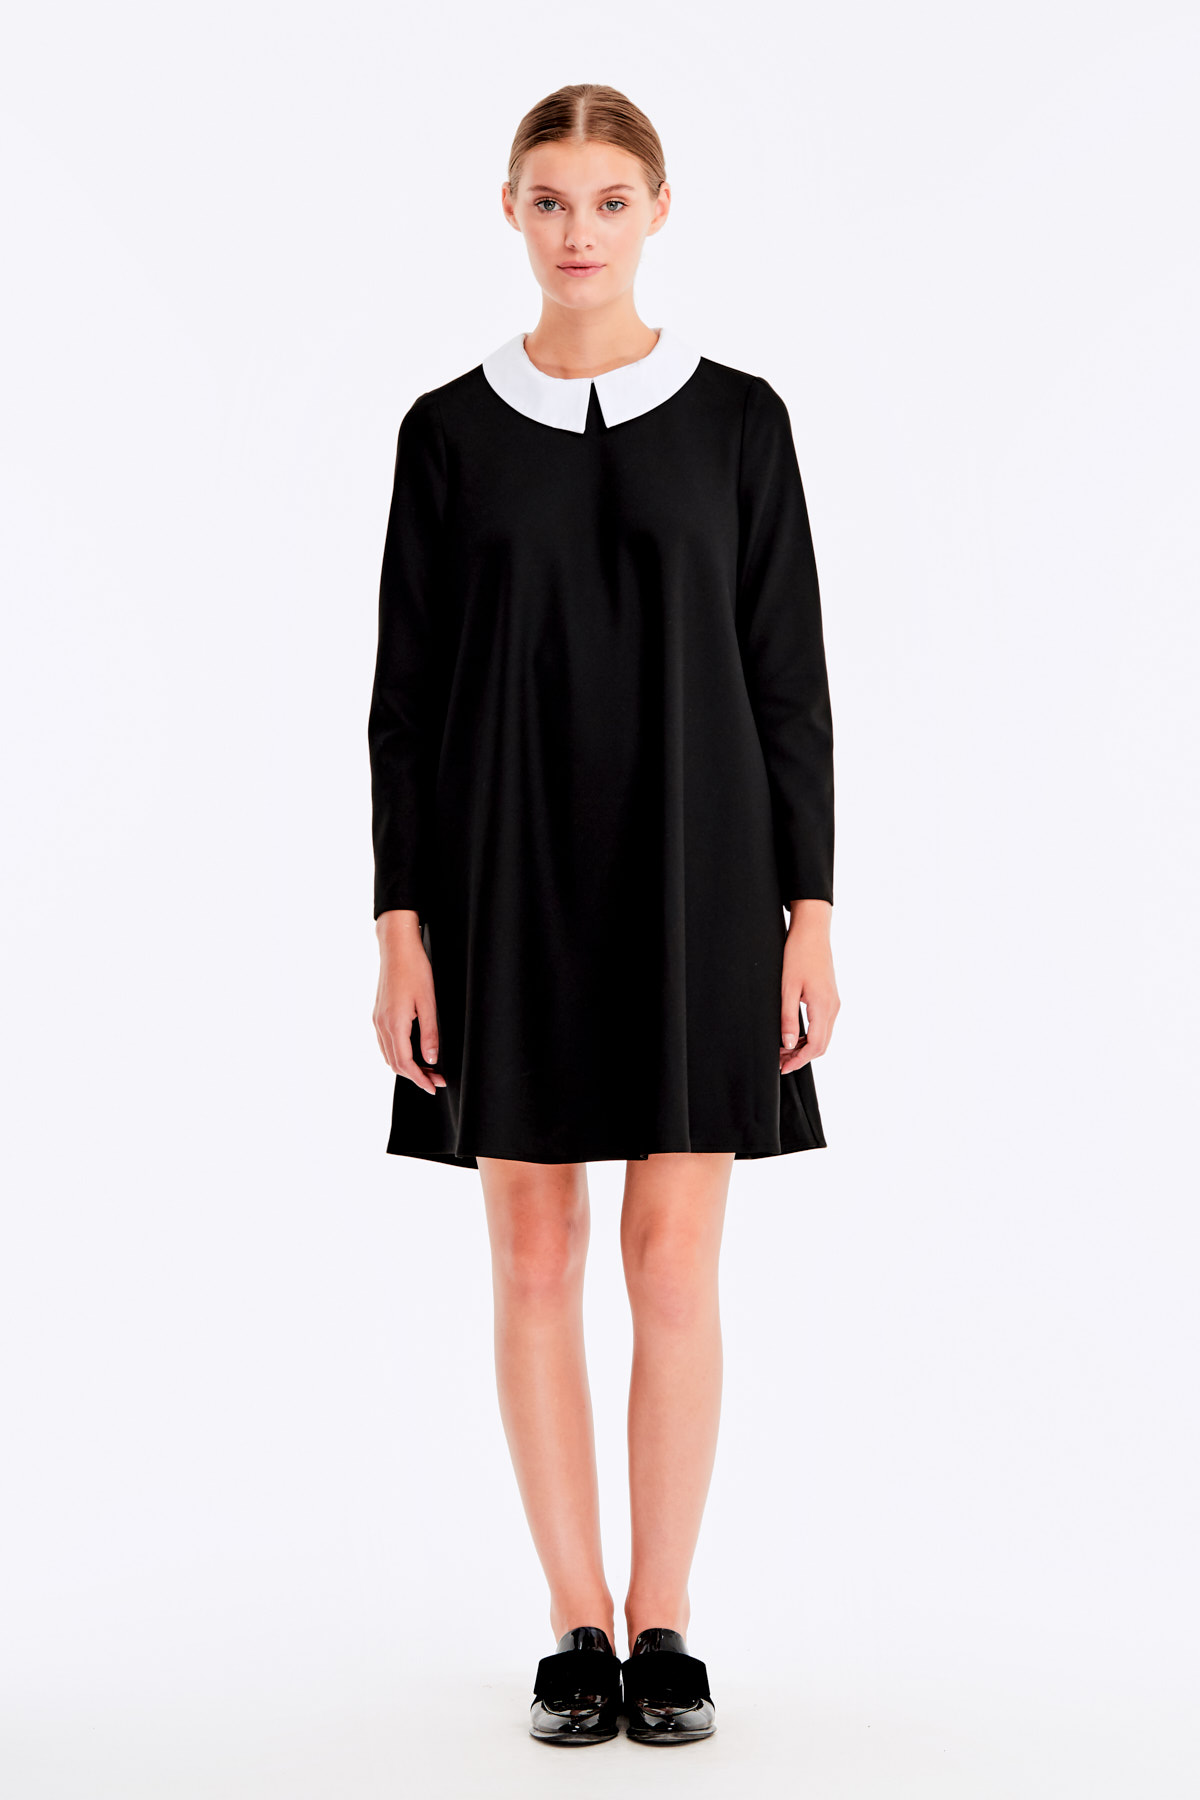 Loose-fitting black dress with a white collar , photo 3